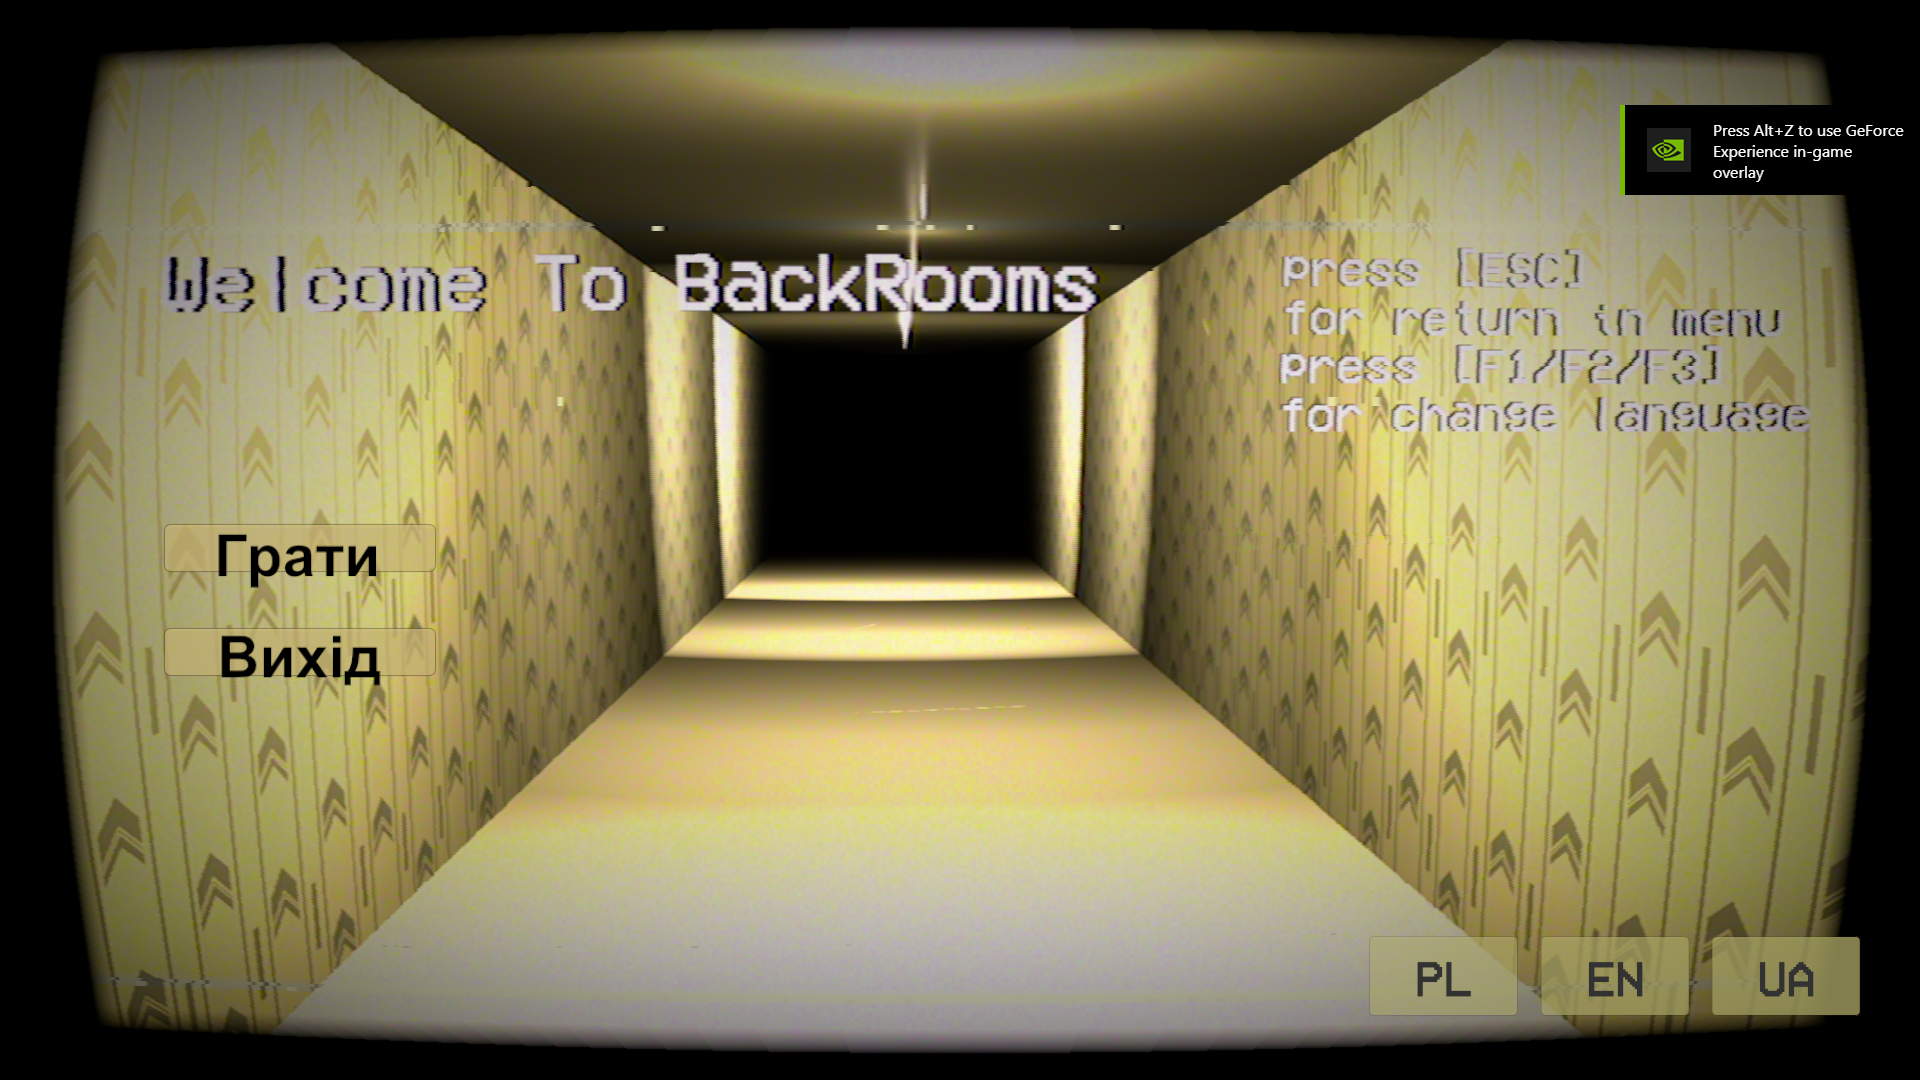 Welcome to the BackRooms(1.5)